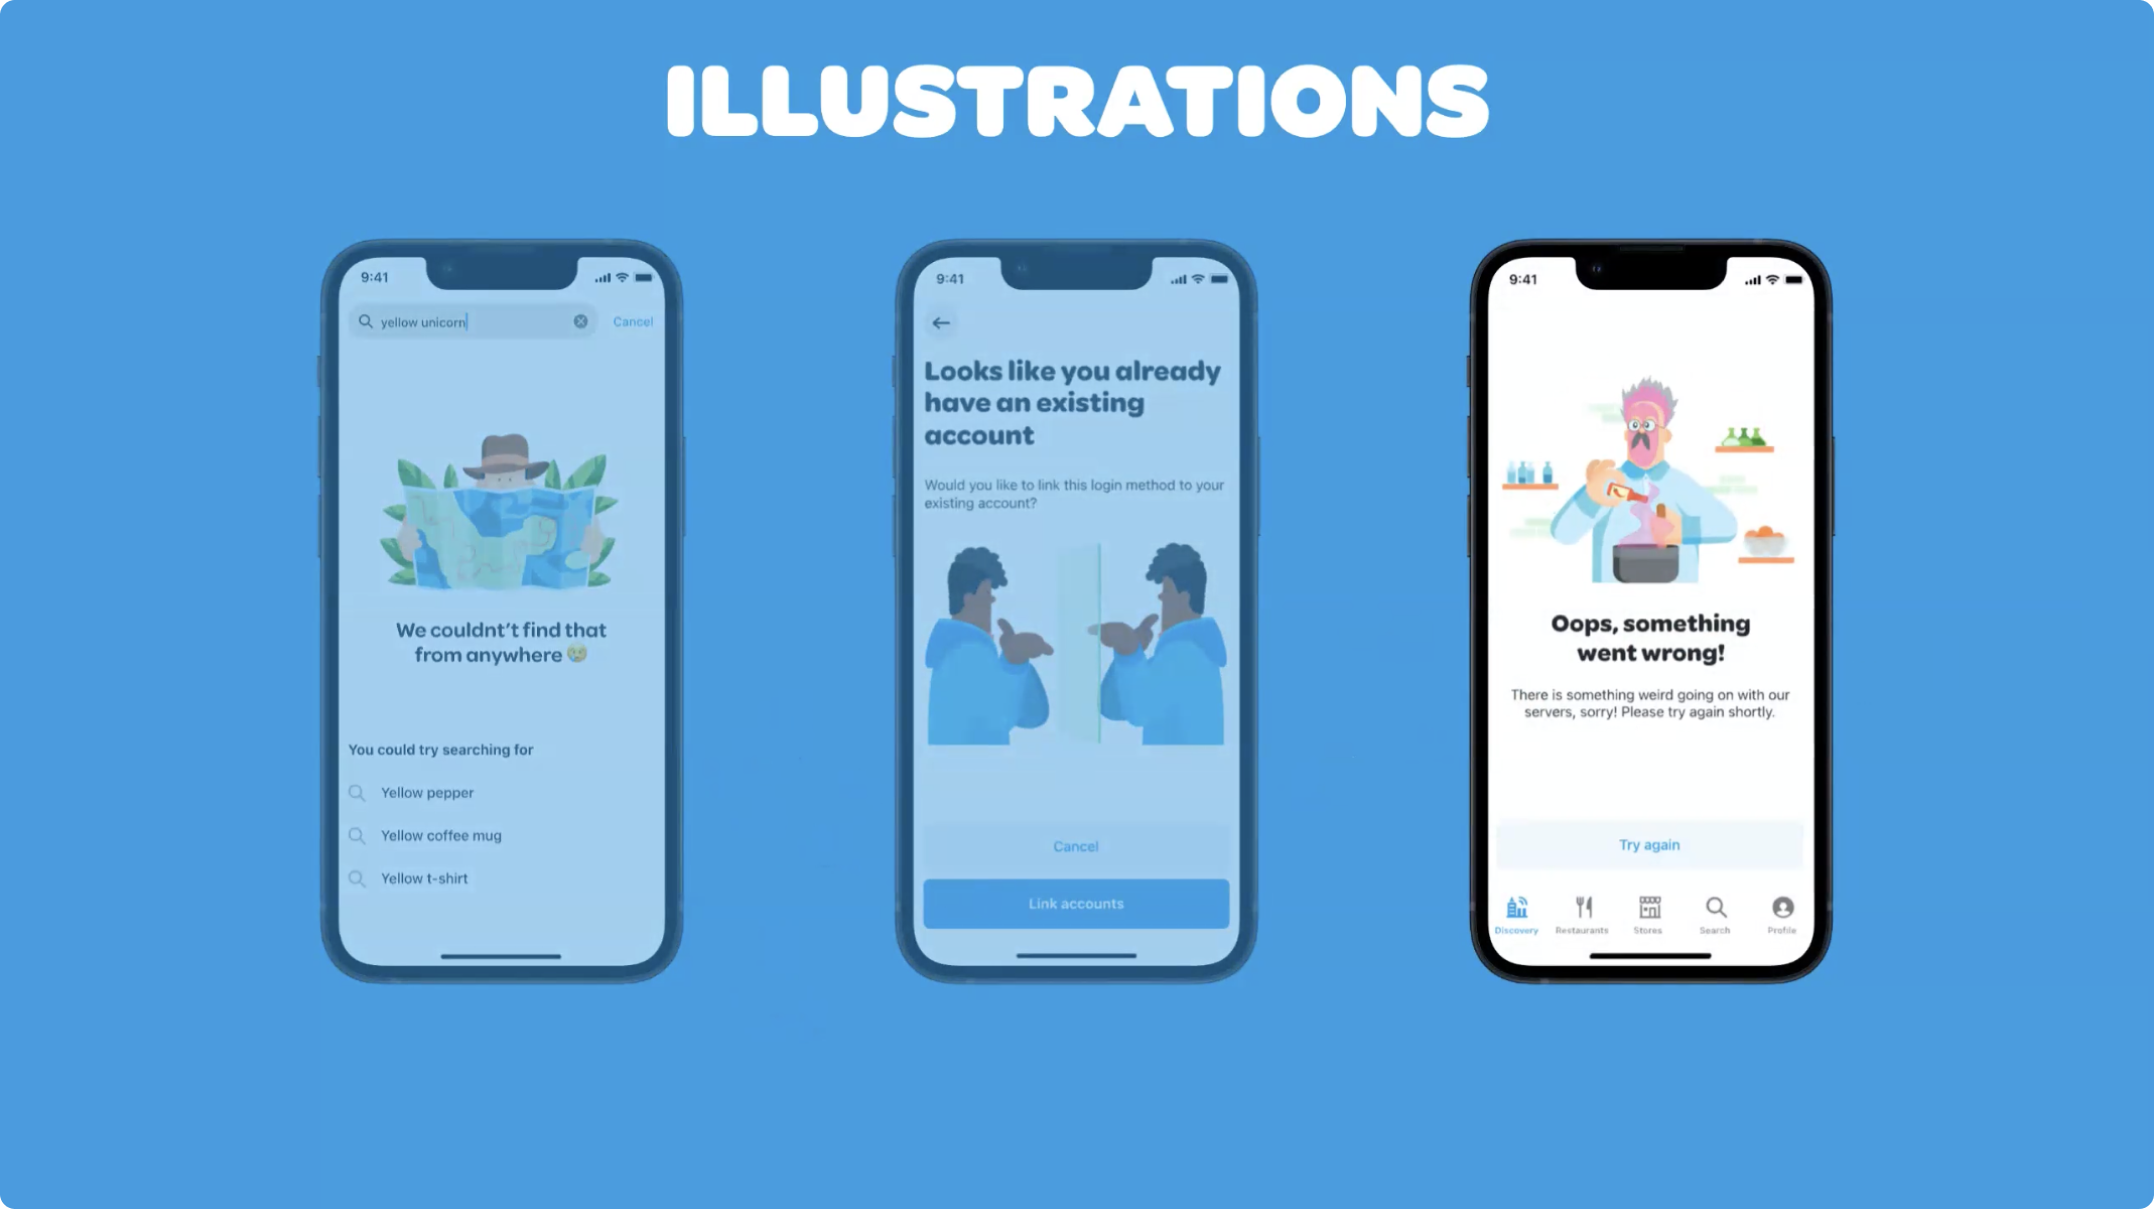 Illustrations are a big part of the Wolt app UI.